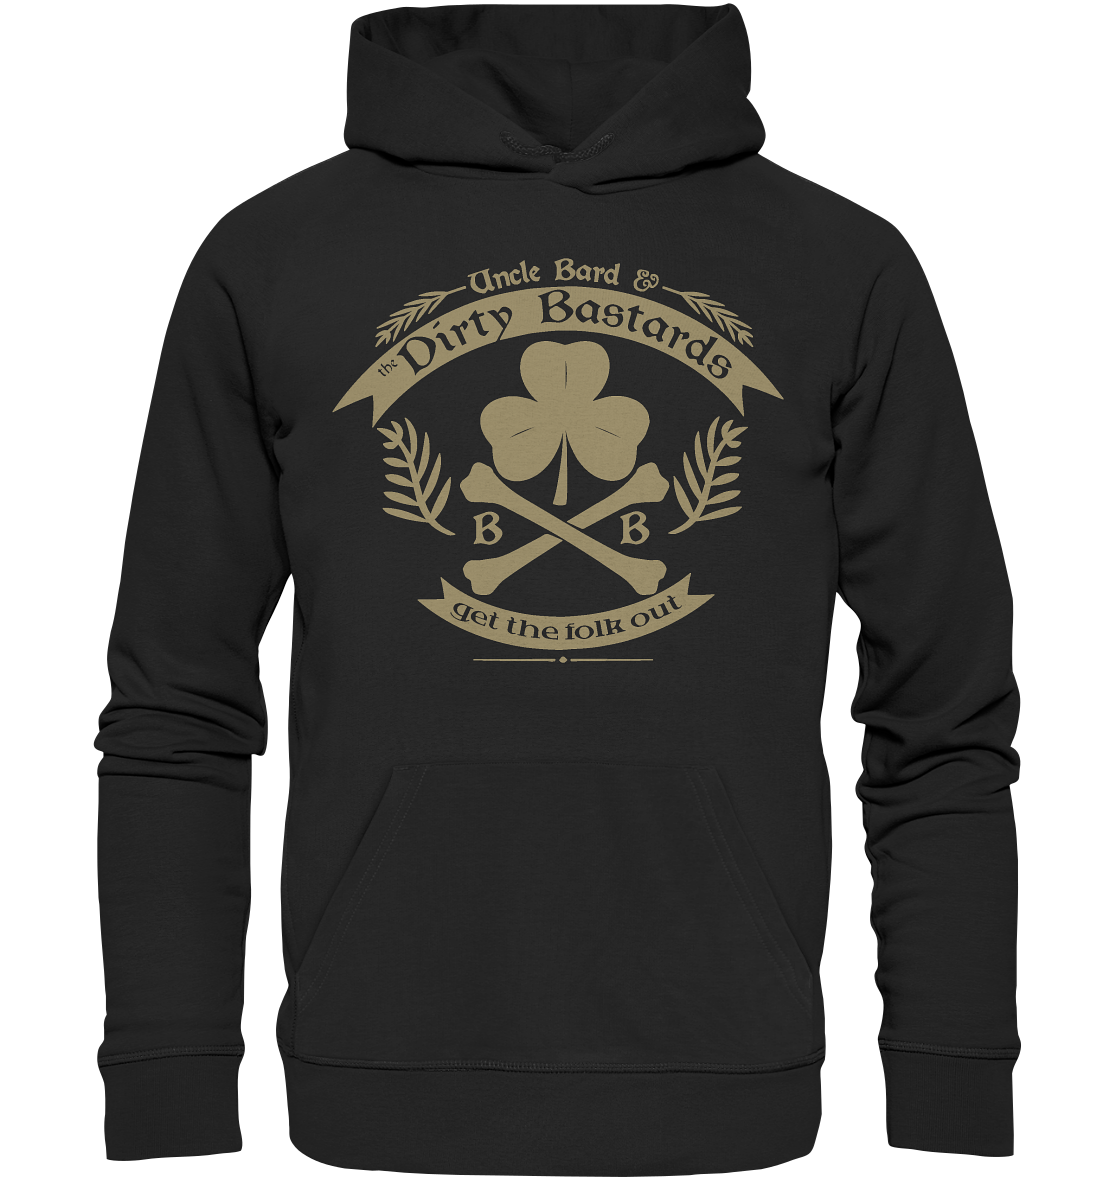 Uncle Bard & the Dirty Bastards "Get The Folk Out" - Premium Unisex Hoodie